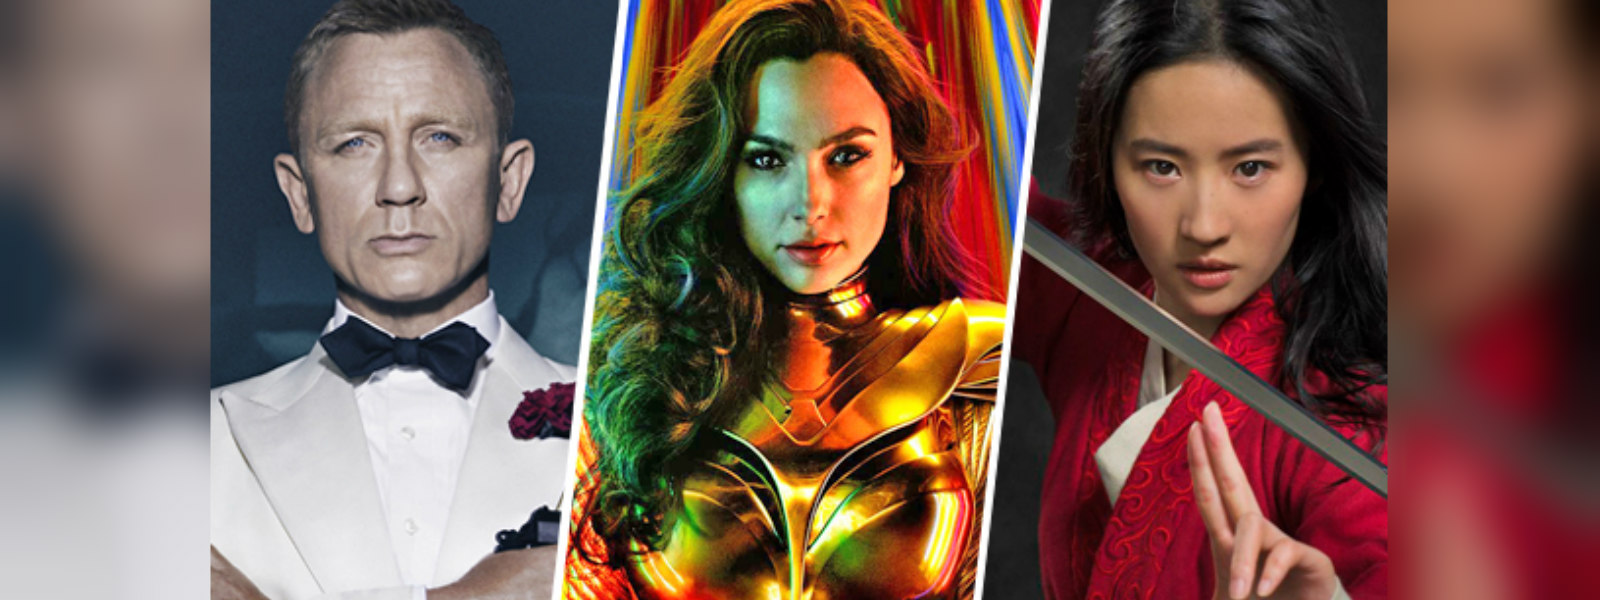 Franchises, adaptations and female superheroes heading to cinemas in 2020